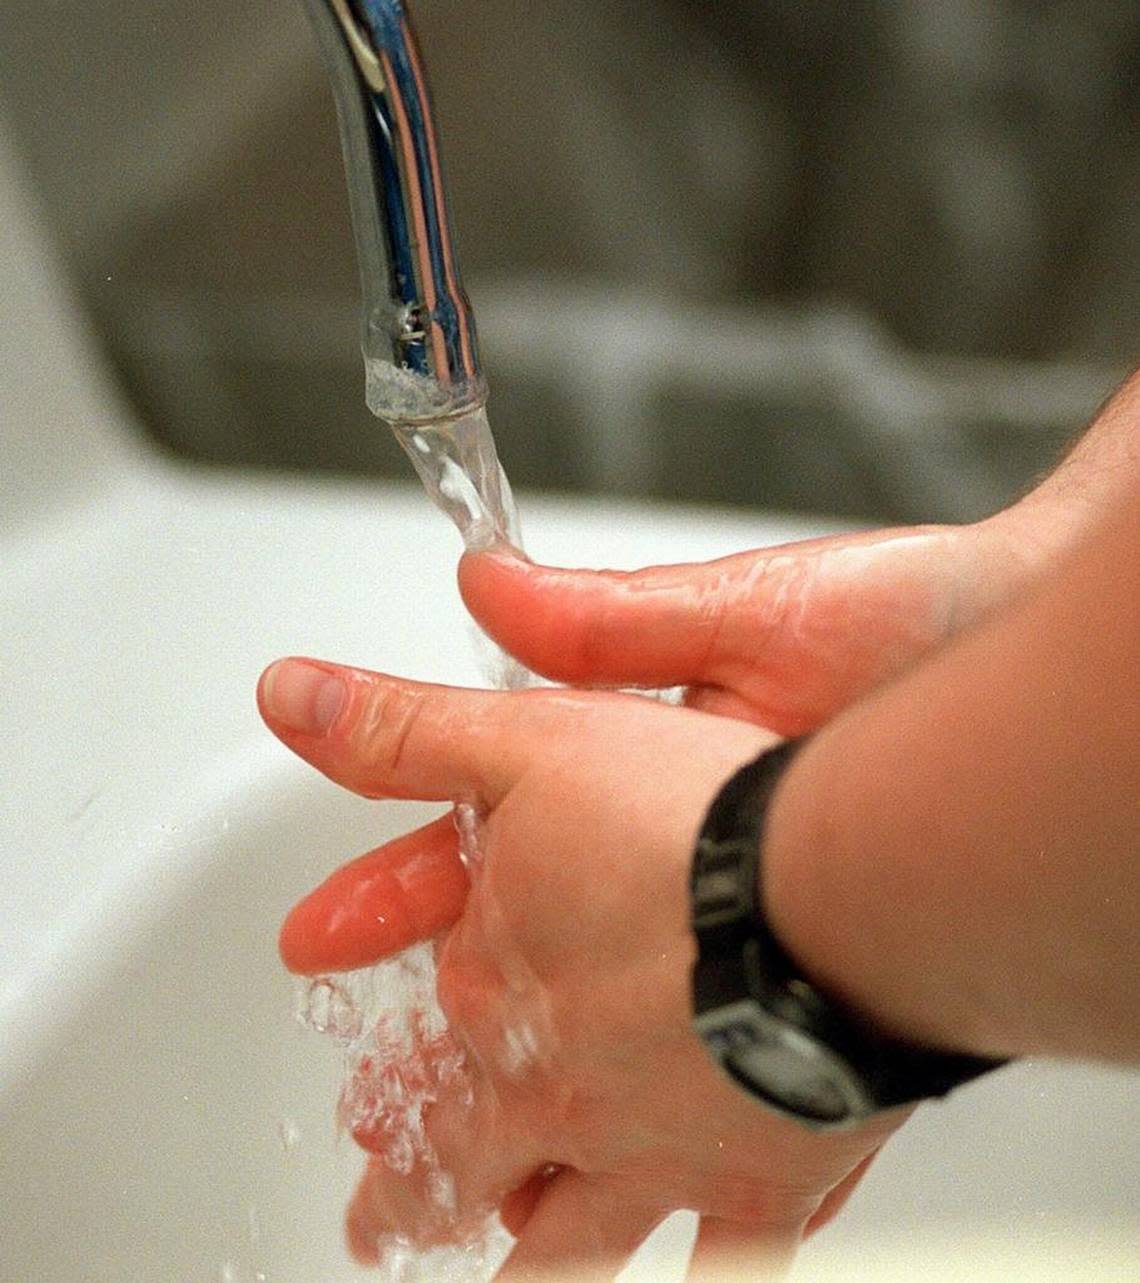 Washing your hands with soap and water is more effective than using alcohol-based hand sanitizers in trying to stop the spread of norovirus, health officials say.